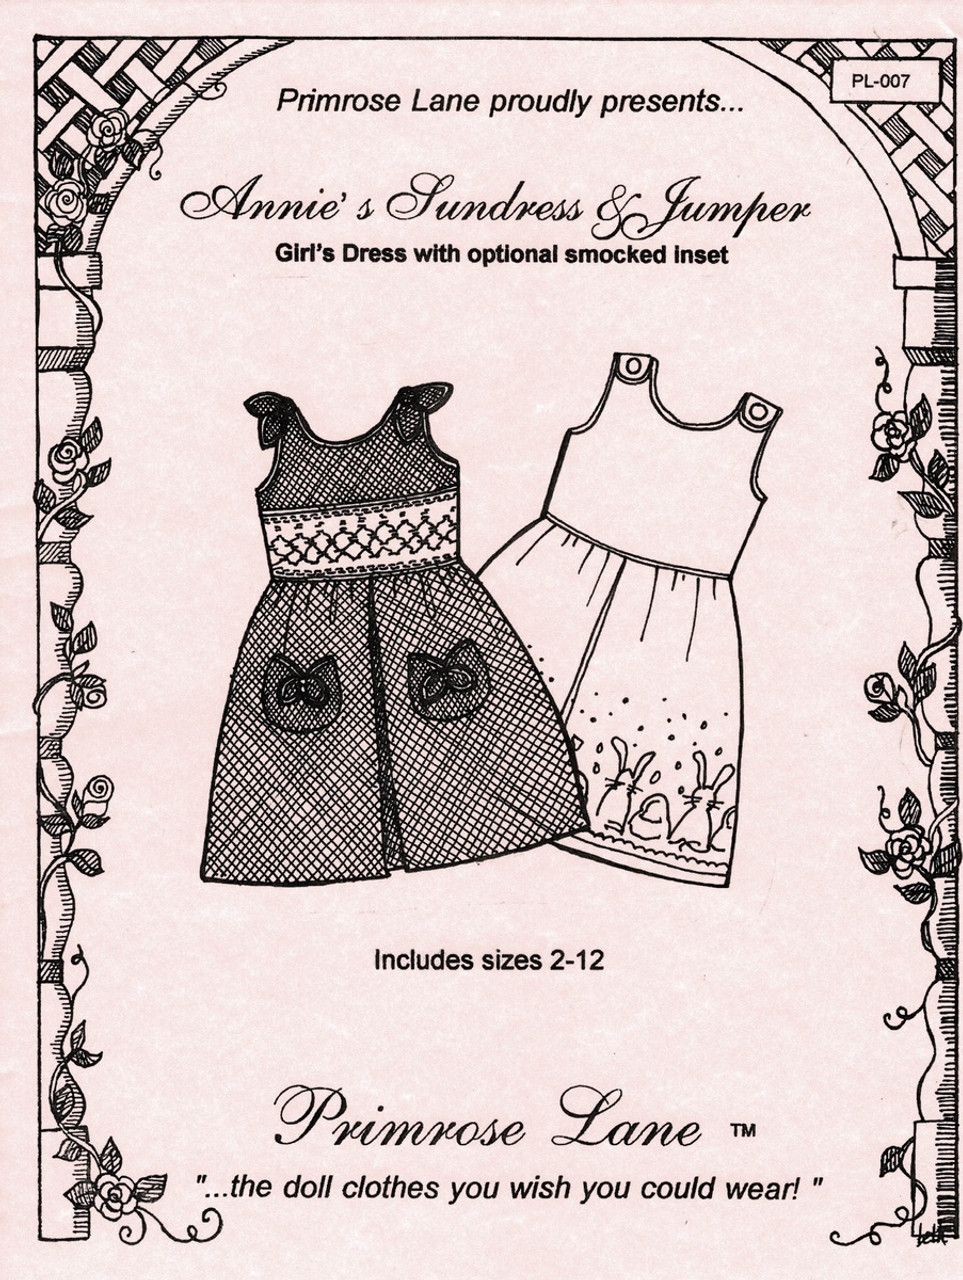 Annie's Sundress and Jumper, A lovely easy to assemble sleeveless sundress, Simple ties or buttons at the shoulder, 
Smocked or un-smocked version, Option to add piping, Sizes 2, 3-4, 5-6, 7-8, 10 & 10 years